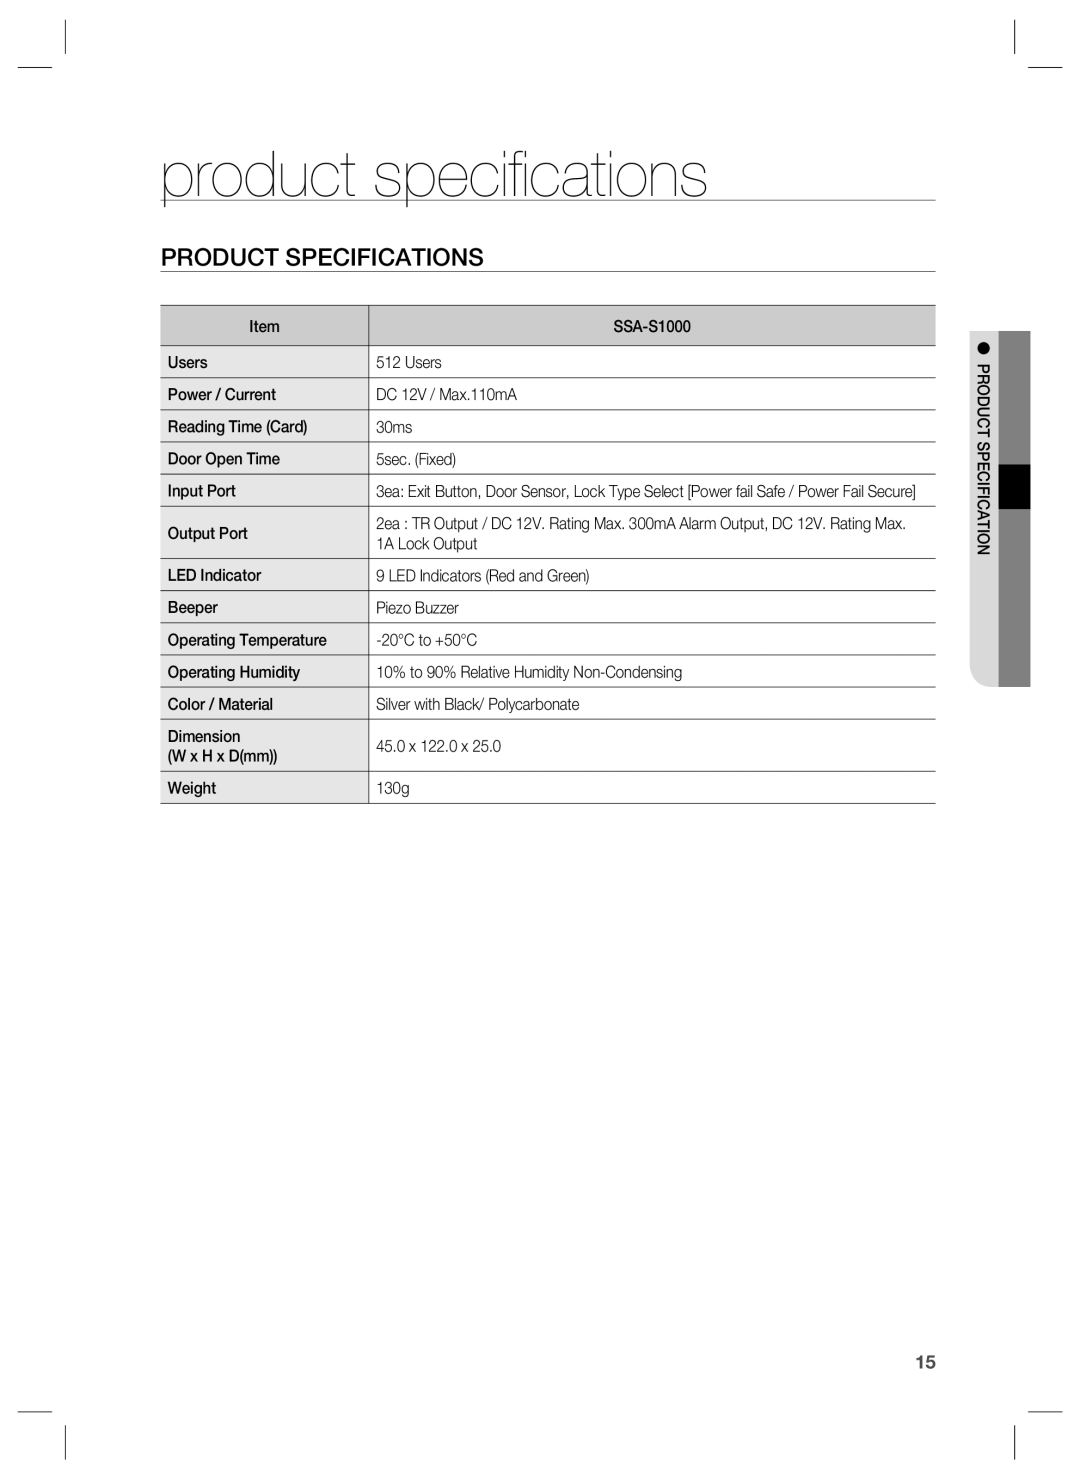 Samsung SSA-S1000 user manual product speciﬁcations, Product Specifications 